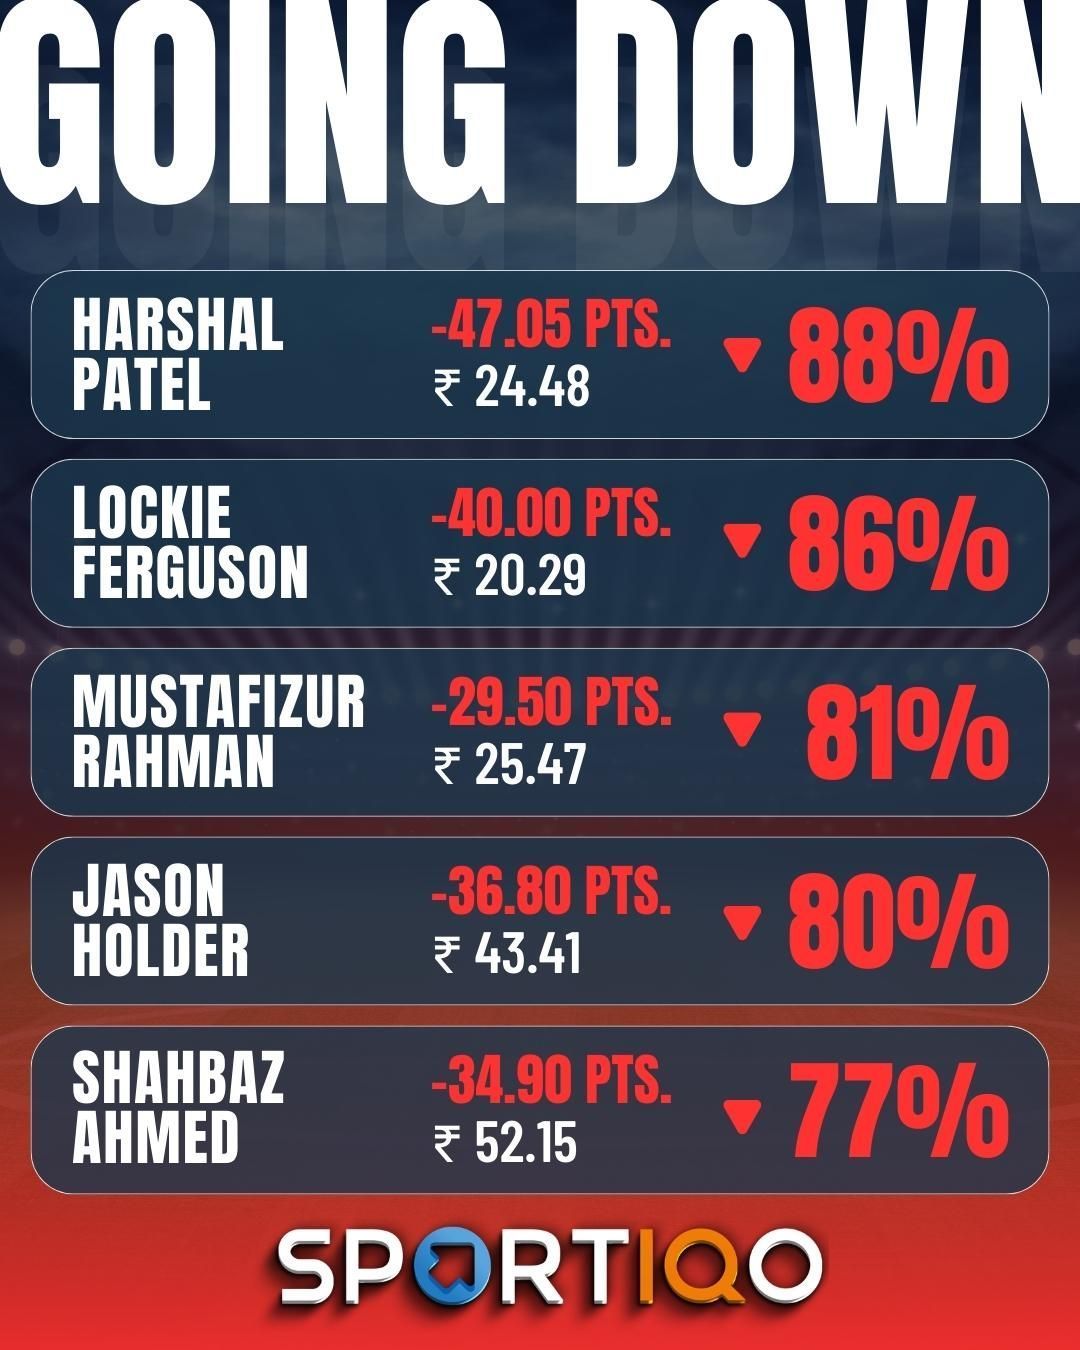 Harshal Patel&#039;s dismal run at the top of losing stocks list continues for another week.